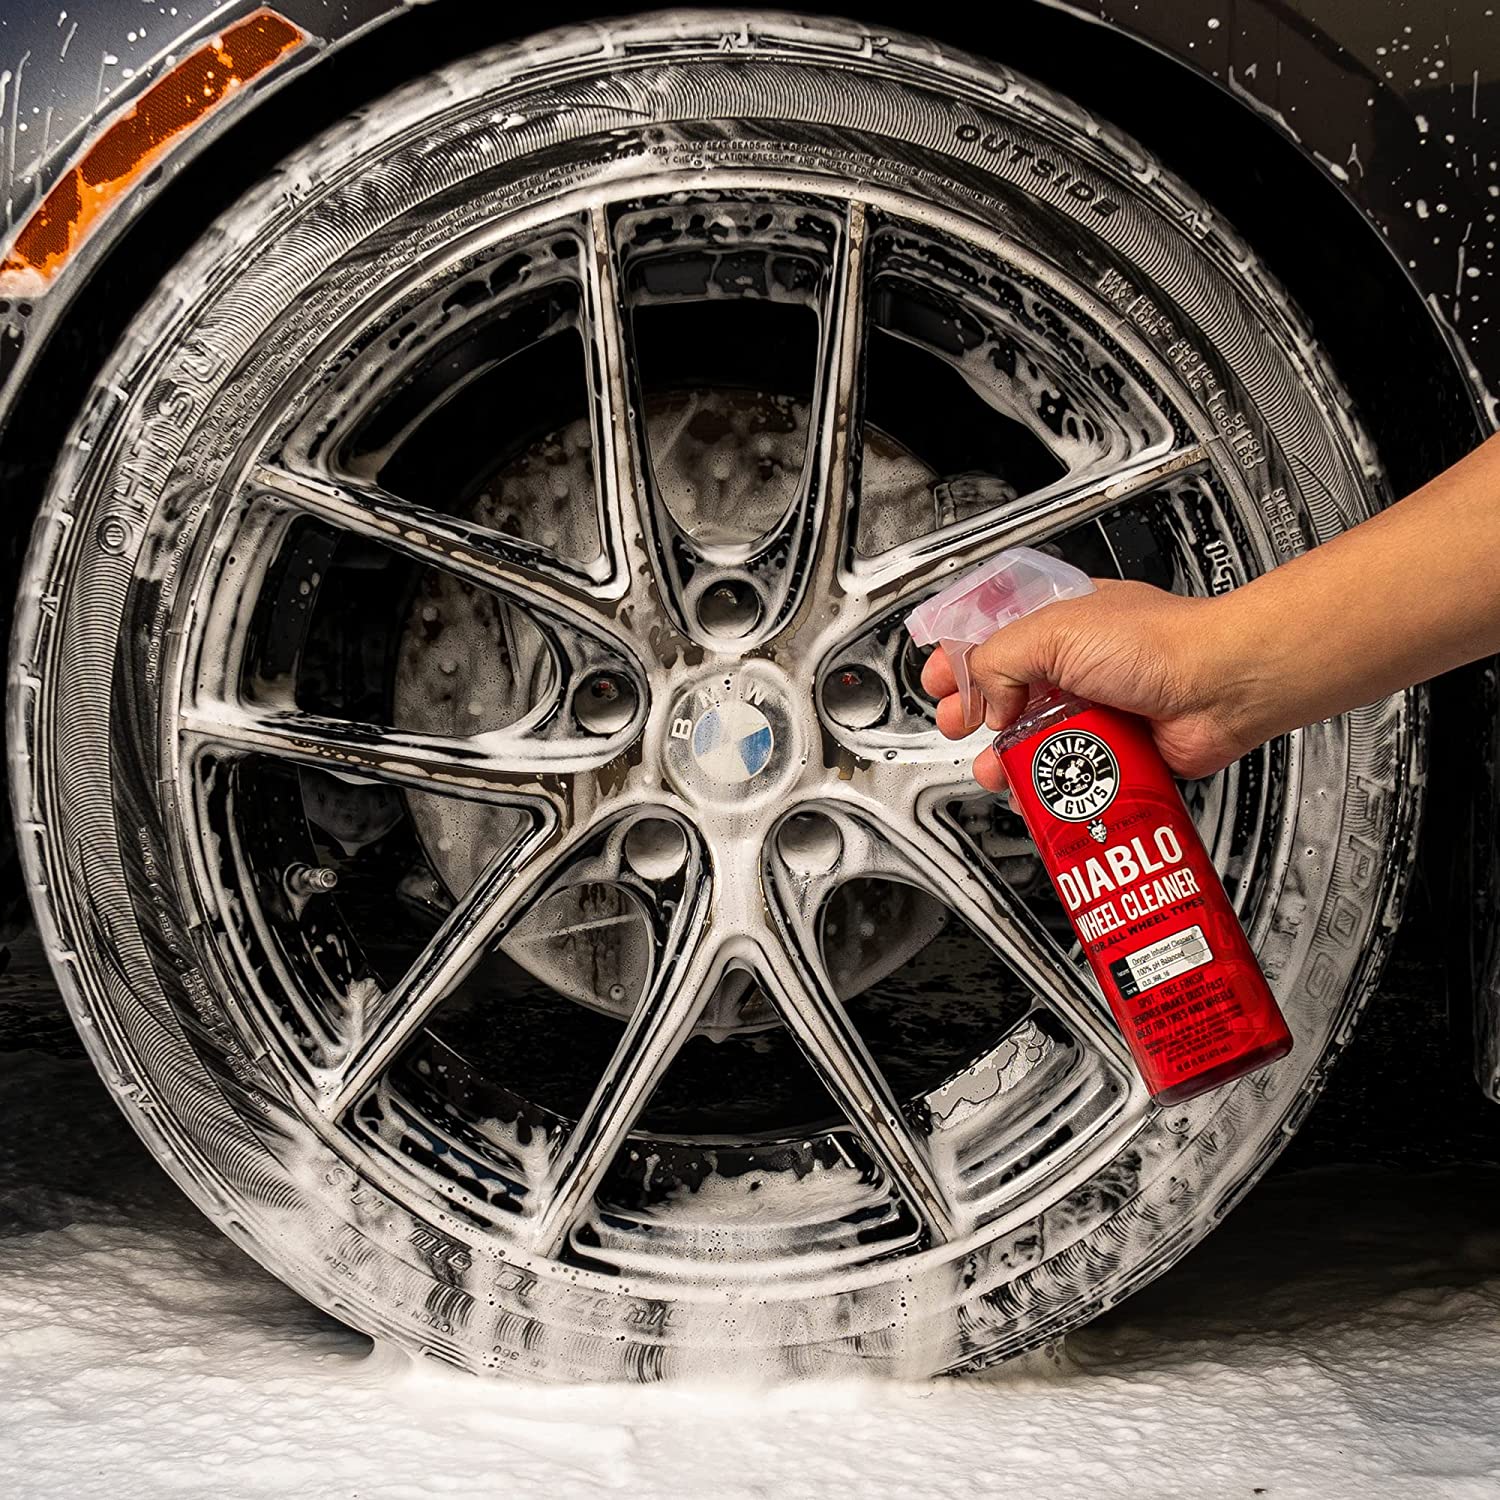 Chemical Guys Decon Pro Iron Remover And Wheel Cleaner